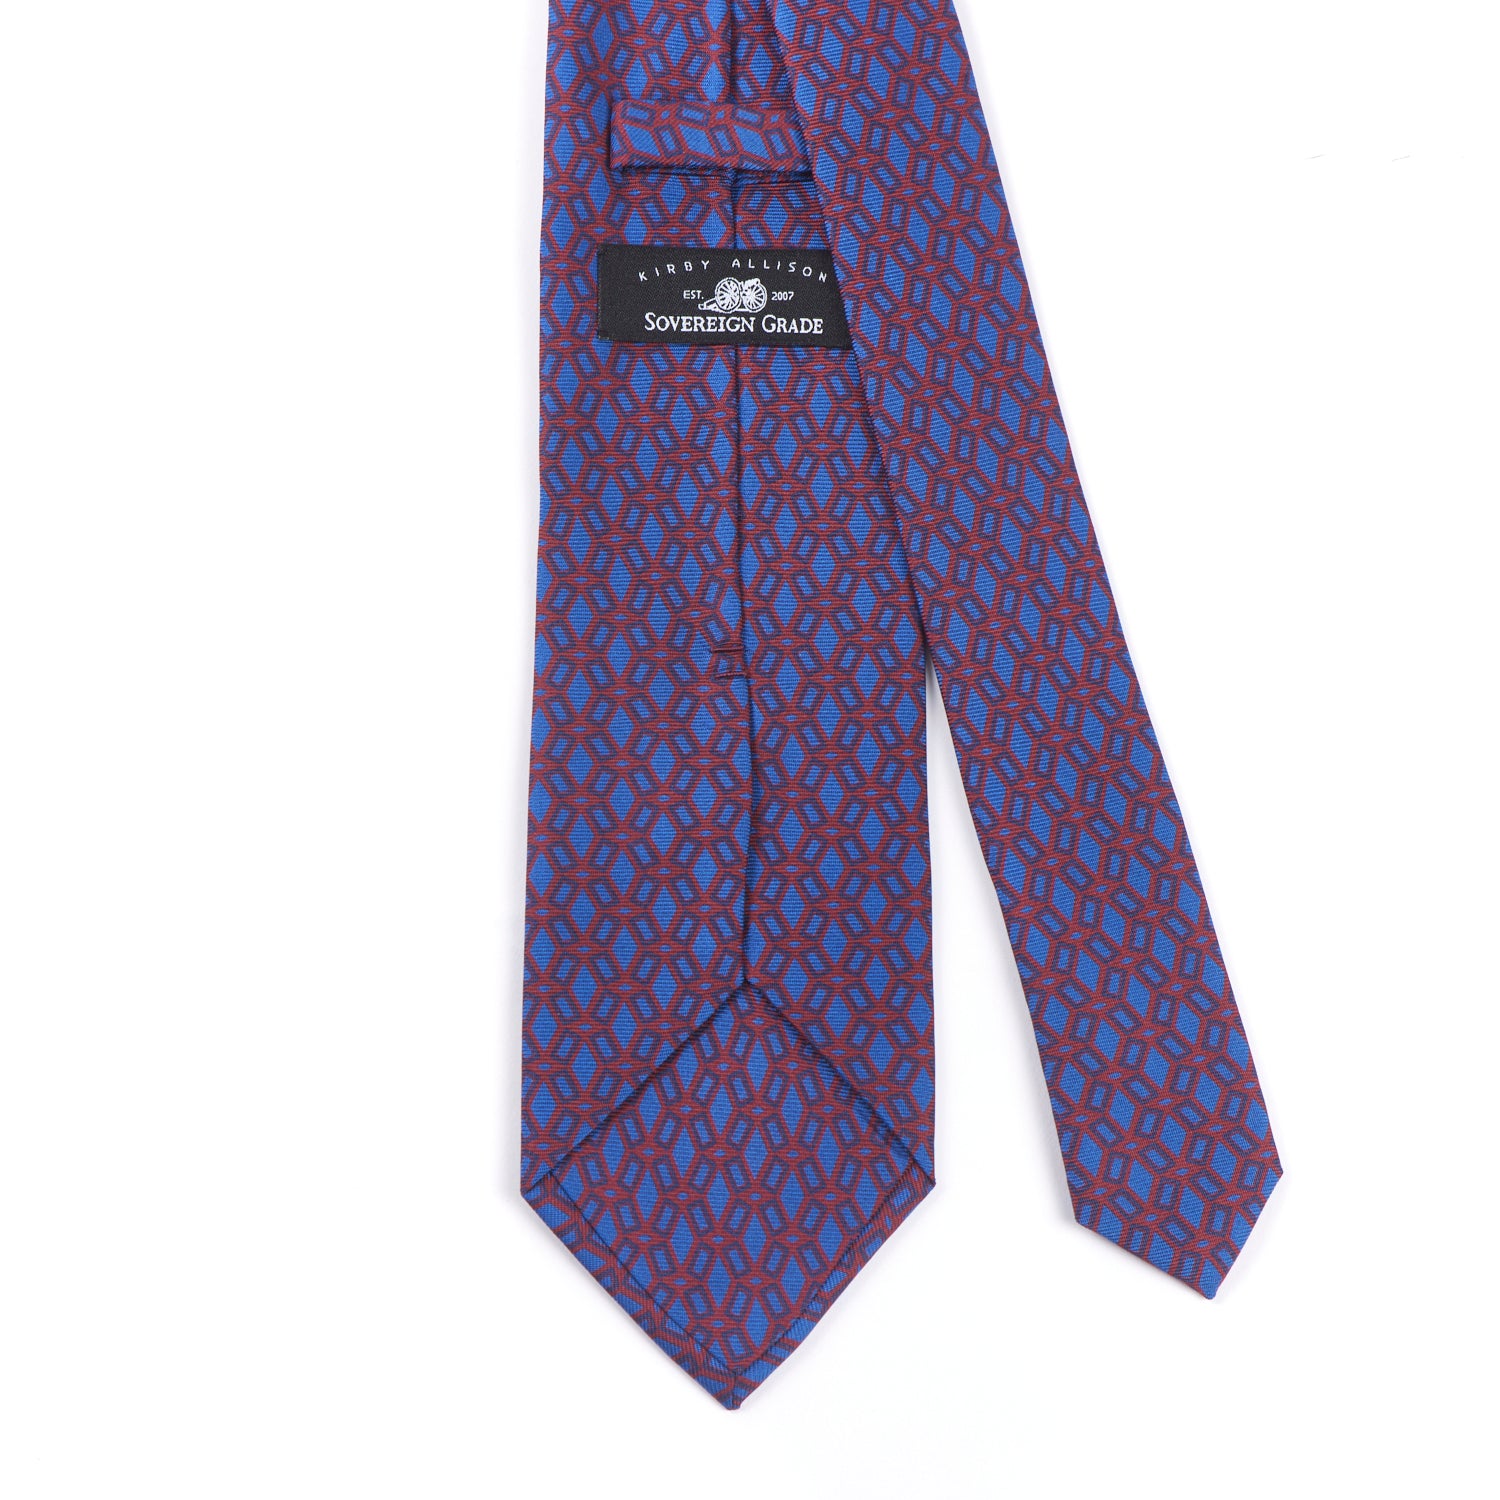 KirbyAllison.com's Sovereign Grade Rust Ancient Madder Tie, 150cm with a blue and red geometric pattern.